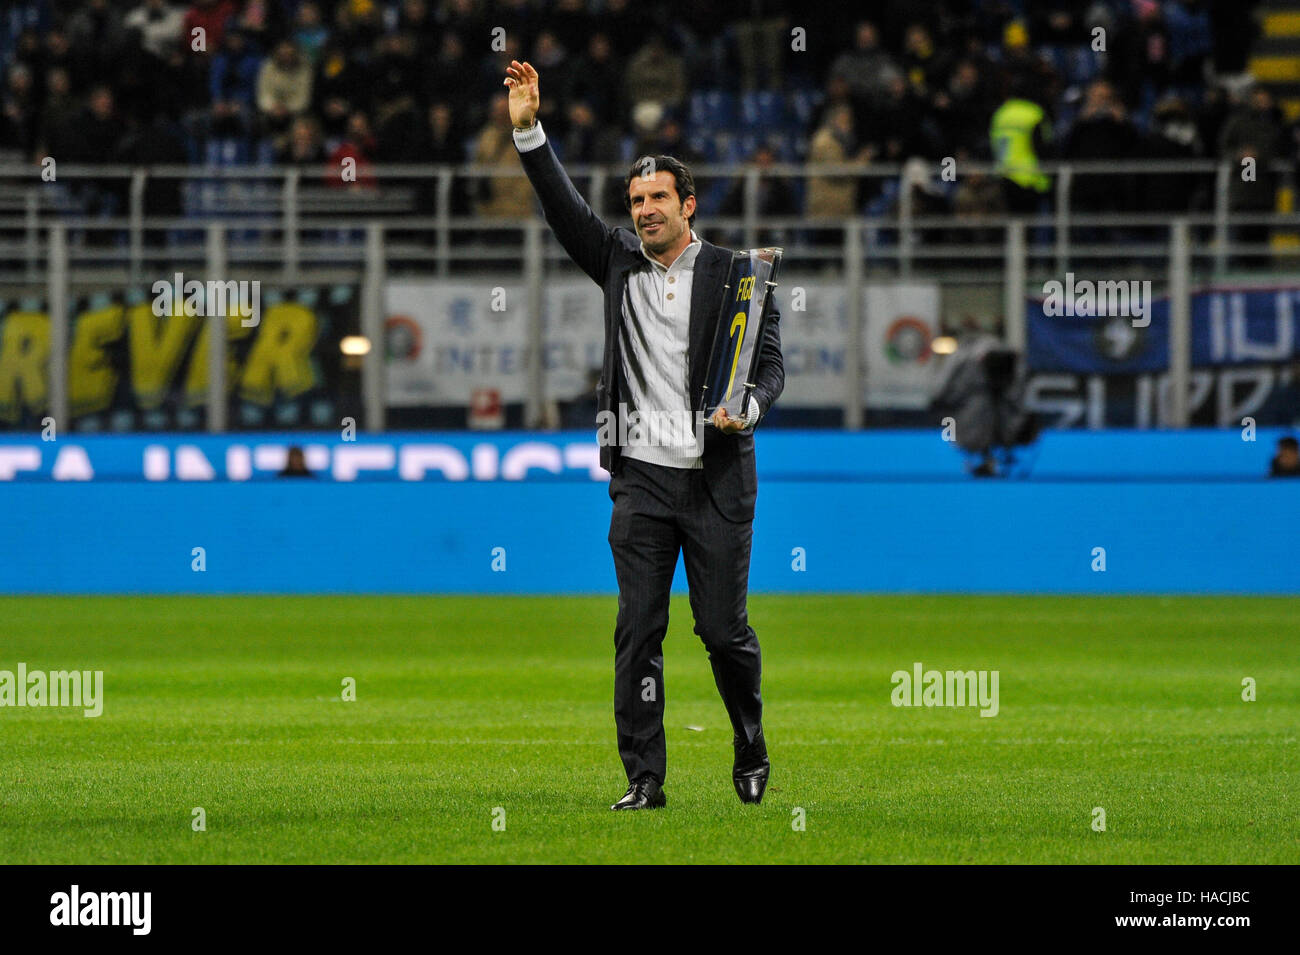 Milan, Italy. 28th Nov, 2016. Former FC Inter player Luis Figo waves as he holds his jersey Before the football match Inter versus Fiorentina. © Gaetano Piazzolla/Pacific Press/Alamy Live News Stock Photo